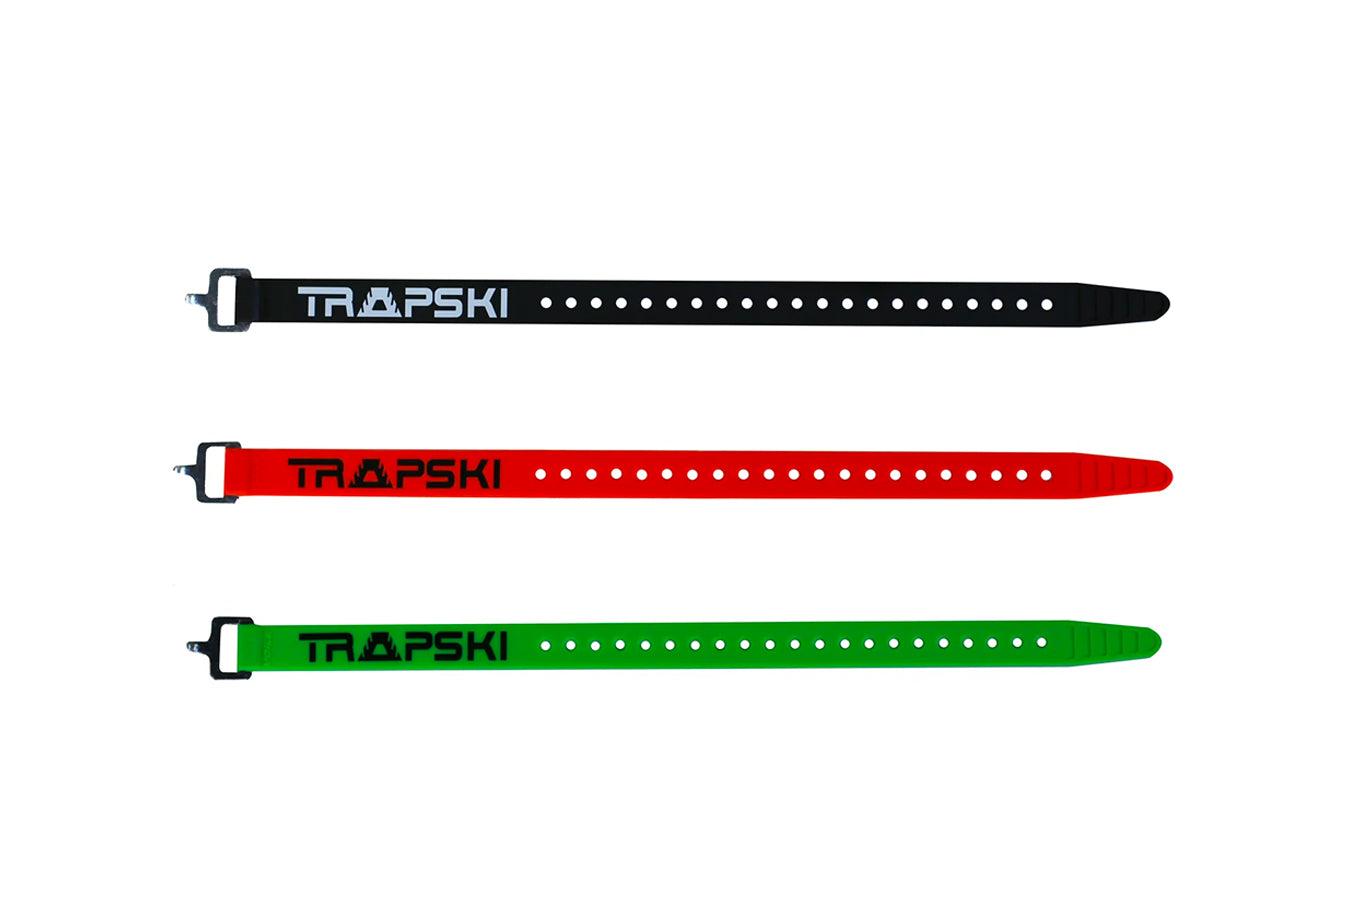 TRAPSKI Voile 15 inch Aluminum Buckle Tension Strap | UV-Resistant | Multi-Use Strap | 3 Year Warranty | USA Veteran Owned Business